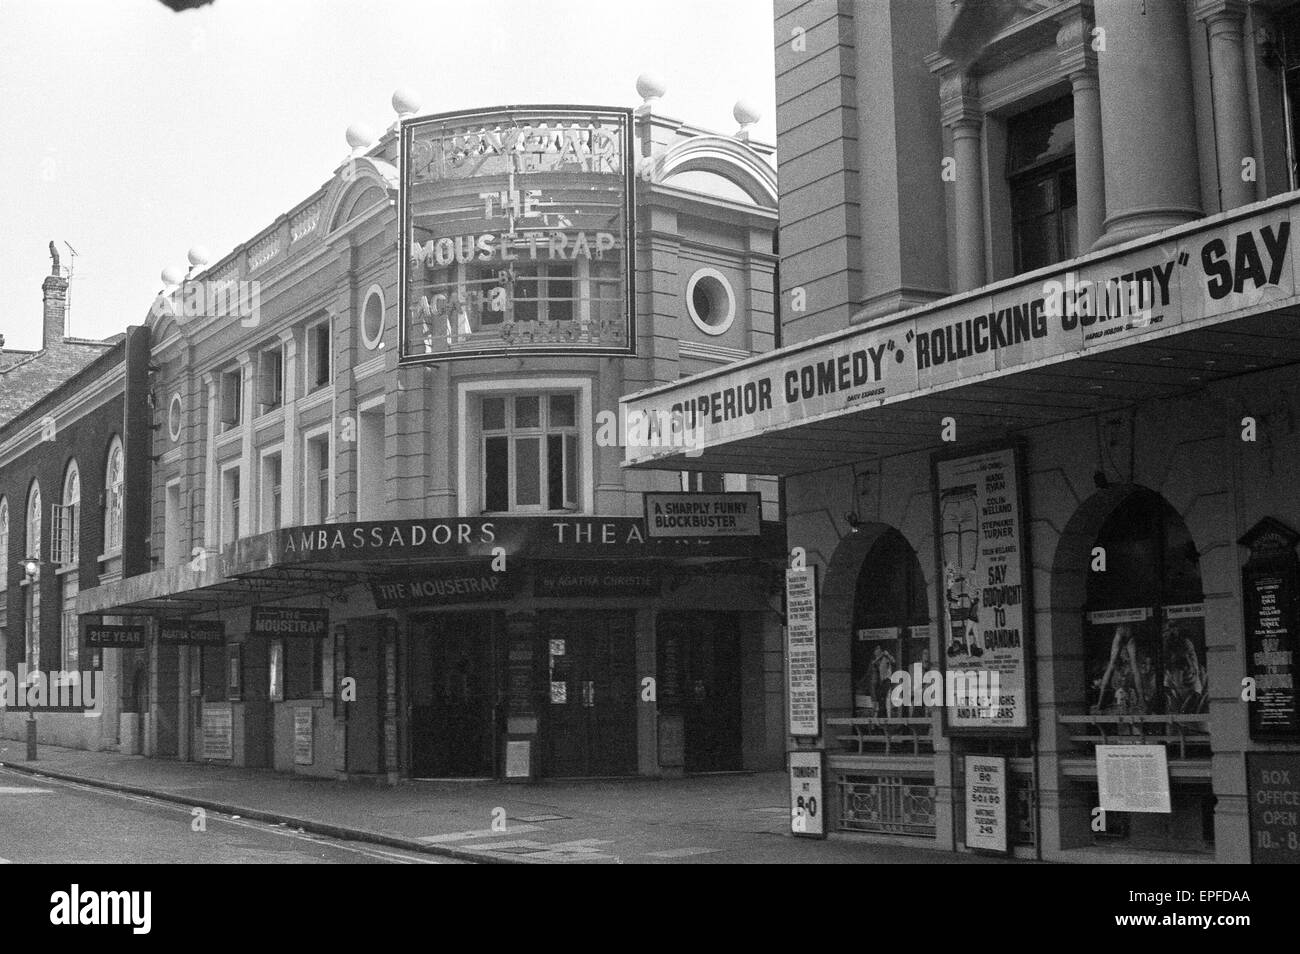 Exterior view of the Ambassadors Theatre in West Street, London Circa 1971. Stock Photo